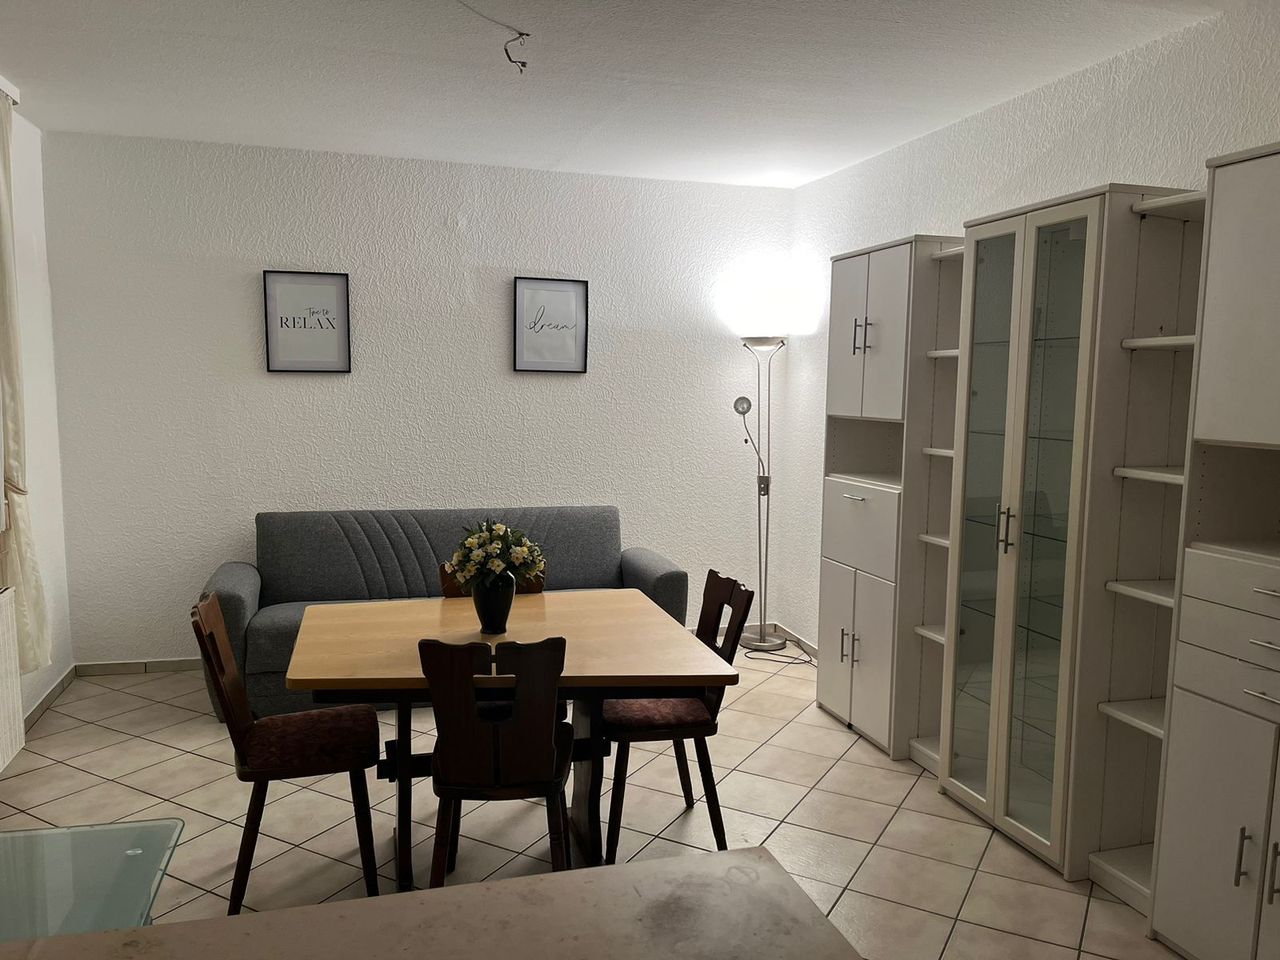 Flexible Furnished Apartment in Gelsenkirchen (BORDER TO ESSEN) - Customize Your Living Space to Your Needs!